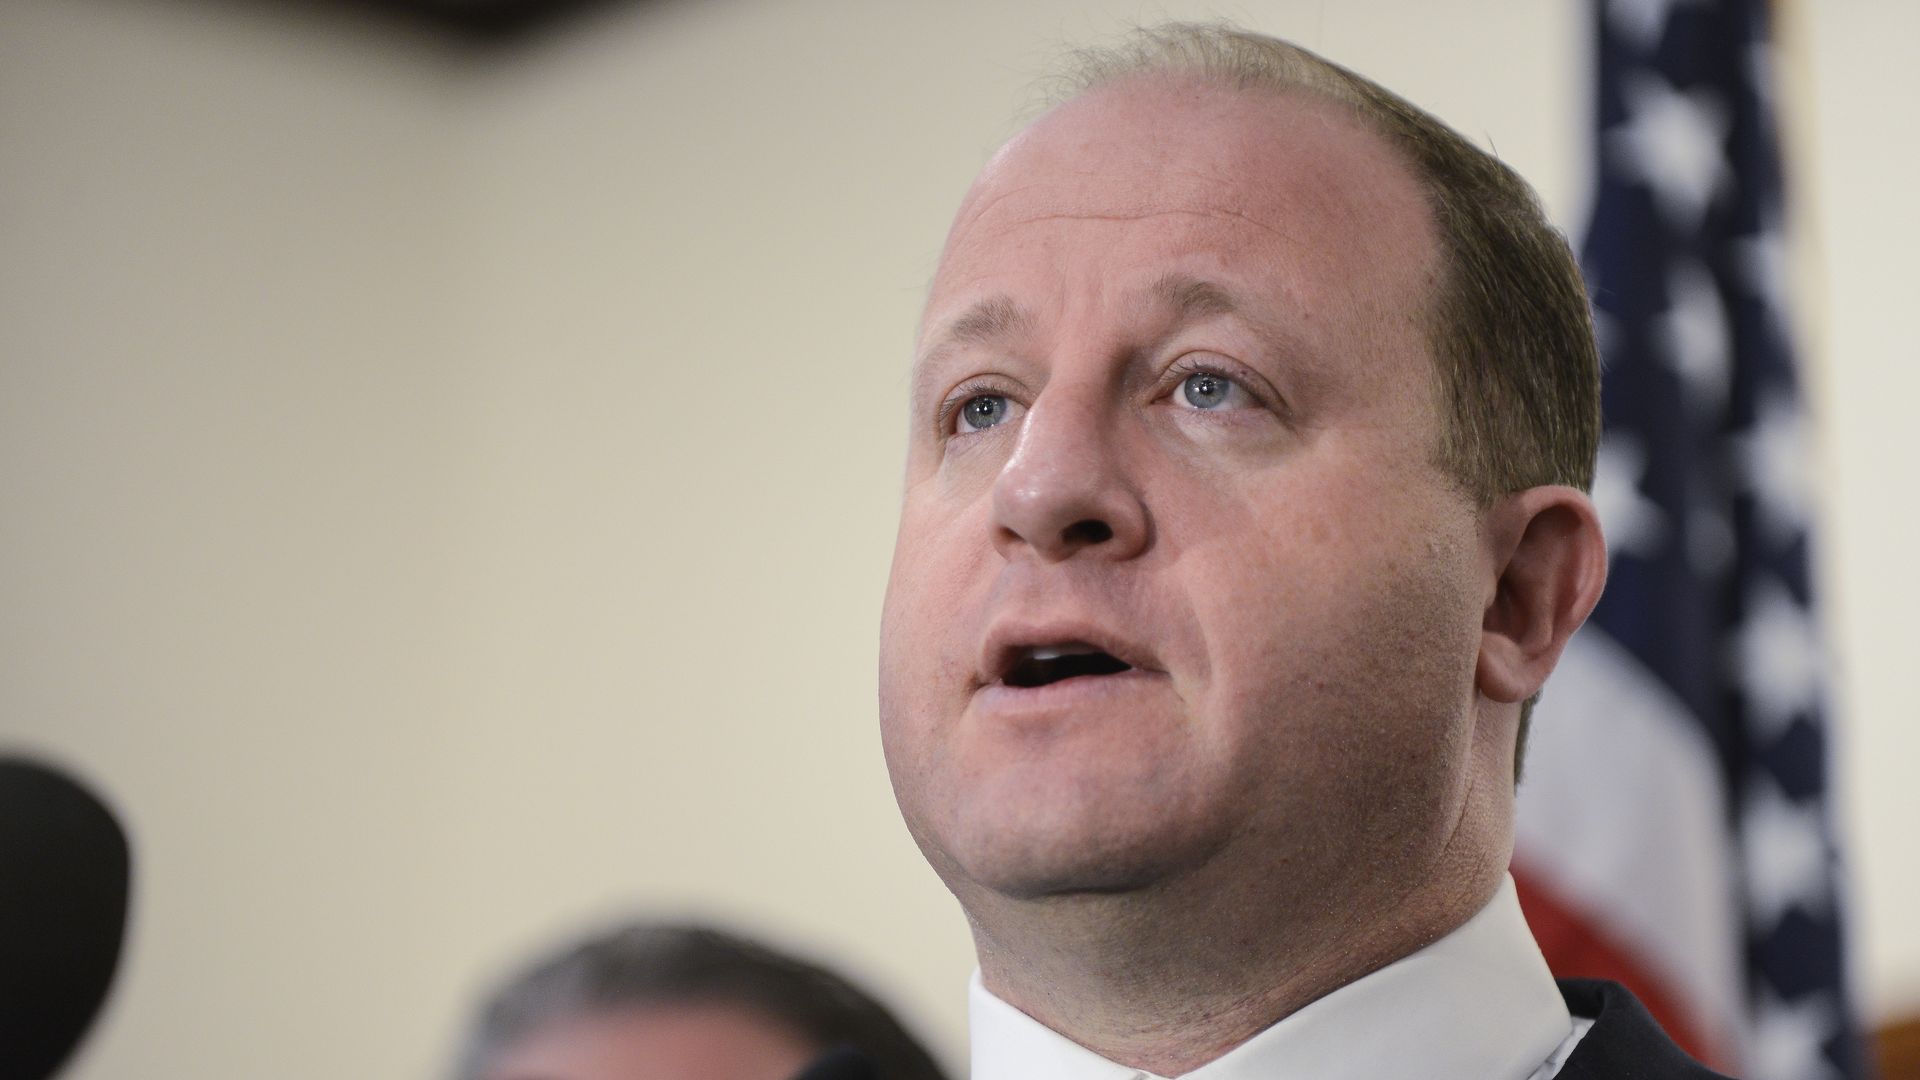 Colorado governor Jared Polis speaks to the media regarding the shooting at STEM School Highlands Ranch during a press conference on May 8, 2019 in Highlands Ranch, Colorado.